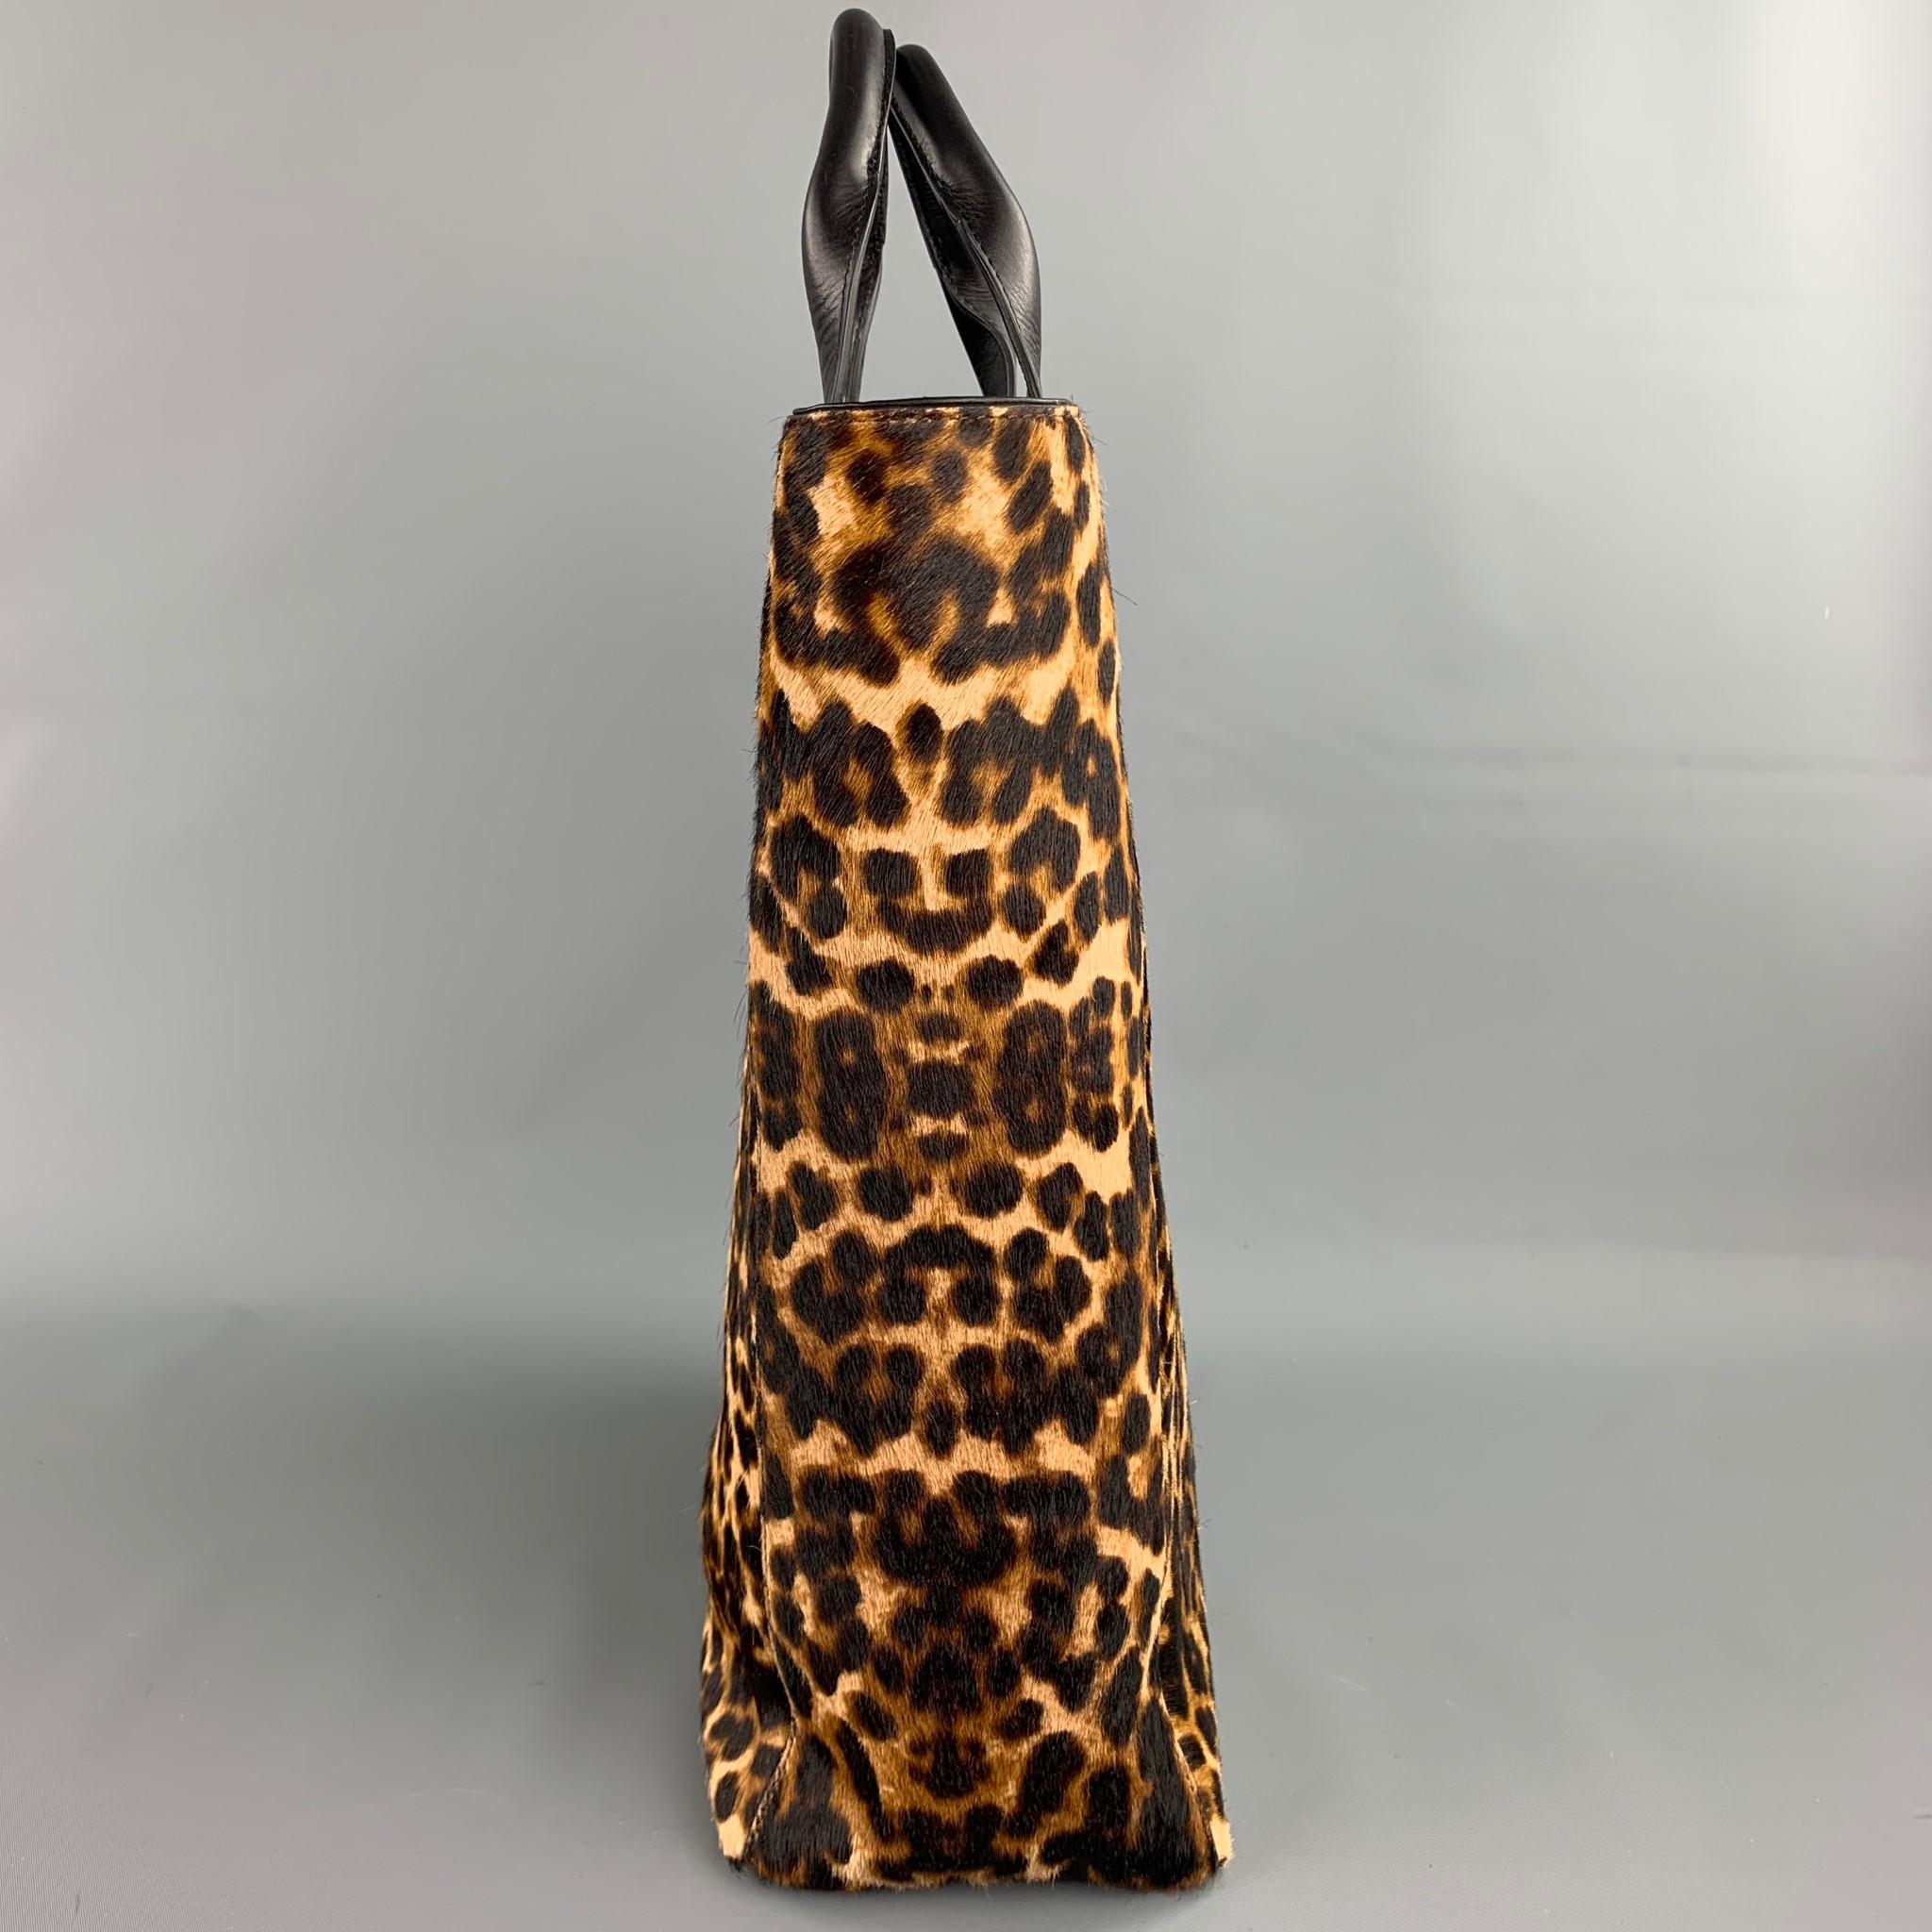 DRIES VAN NOTEN tote bag comes in a tan & black animal print pony hair with a leather trim featuring top handles, shoulder strap, and a inner pocket.

New With Tags.

Measurements:

Length: 11.5 in.
Width: 5 in.
Height: 14 in.
Drop: 15 in.  